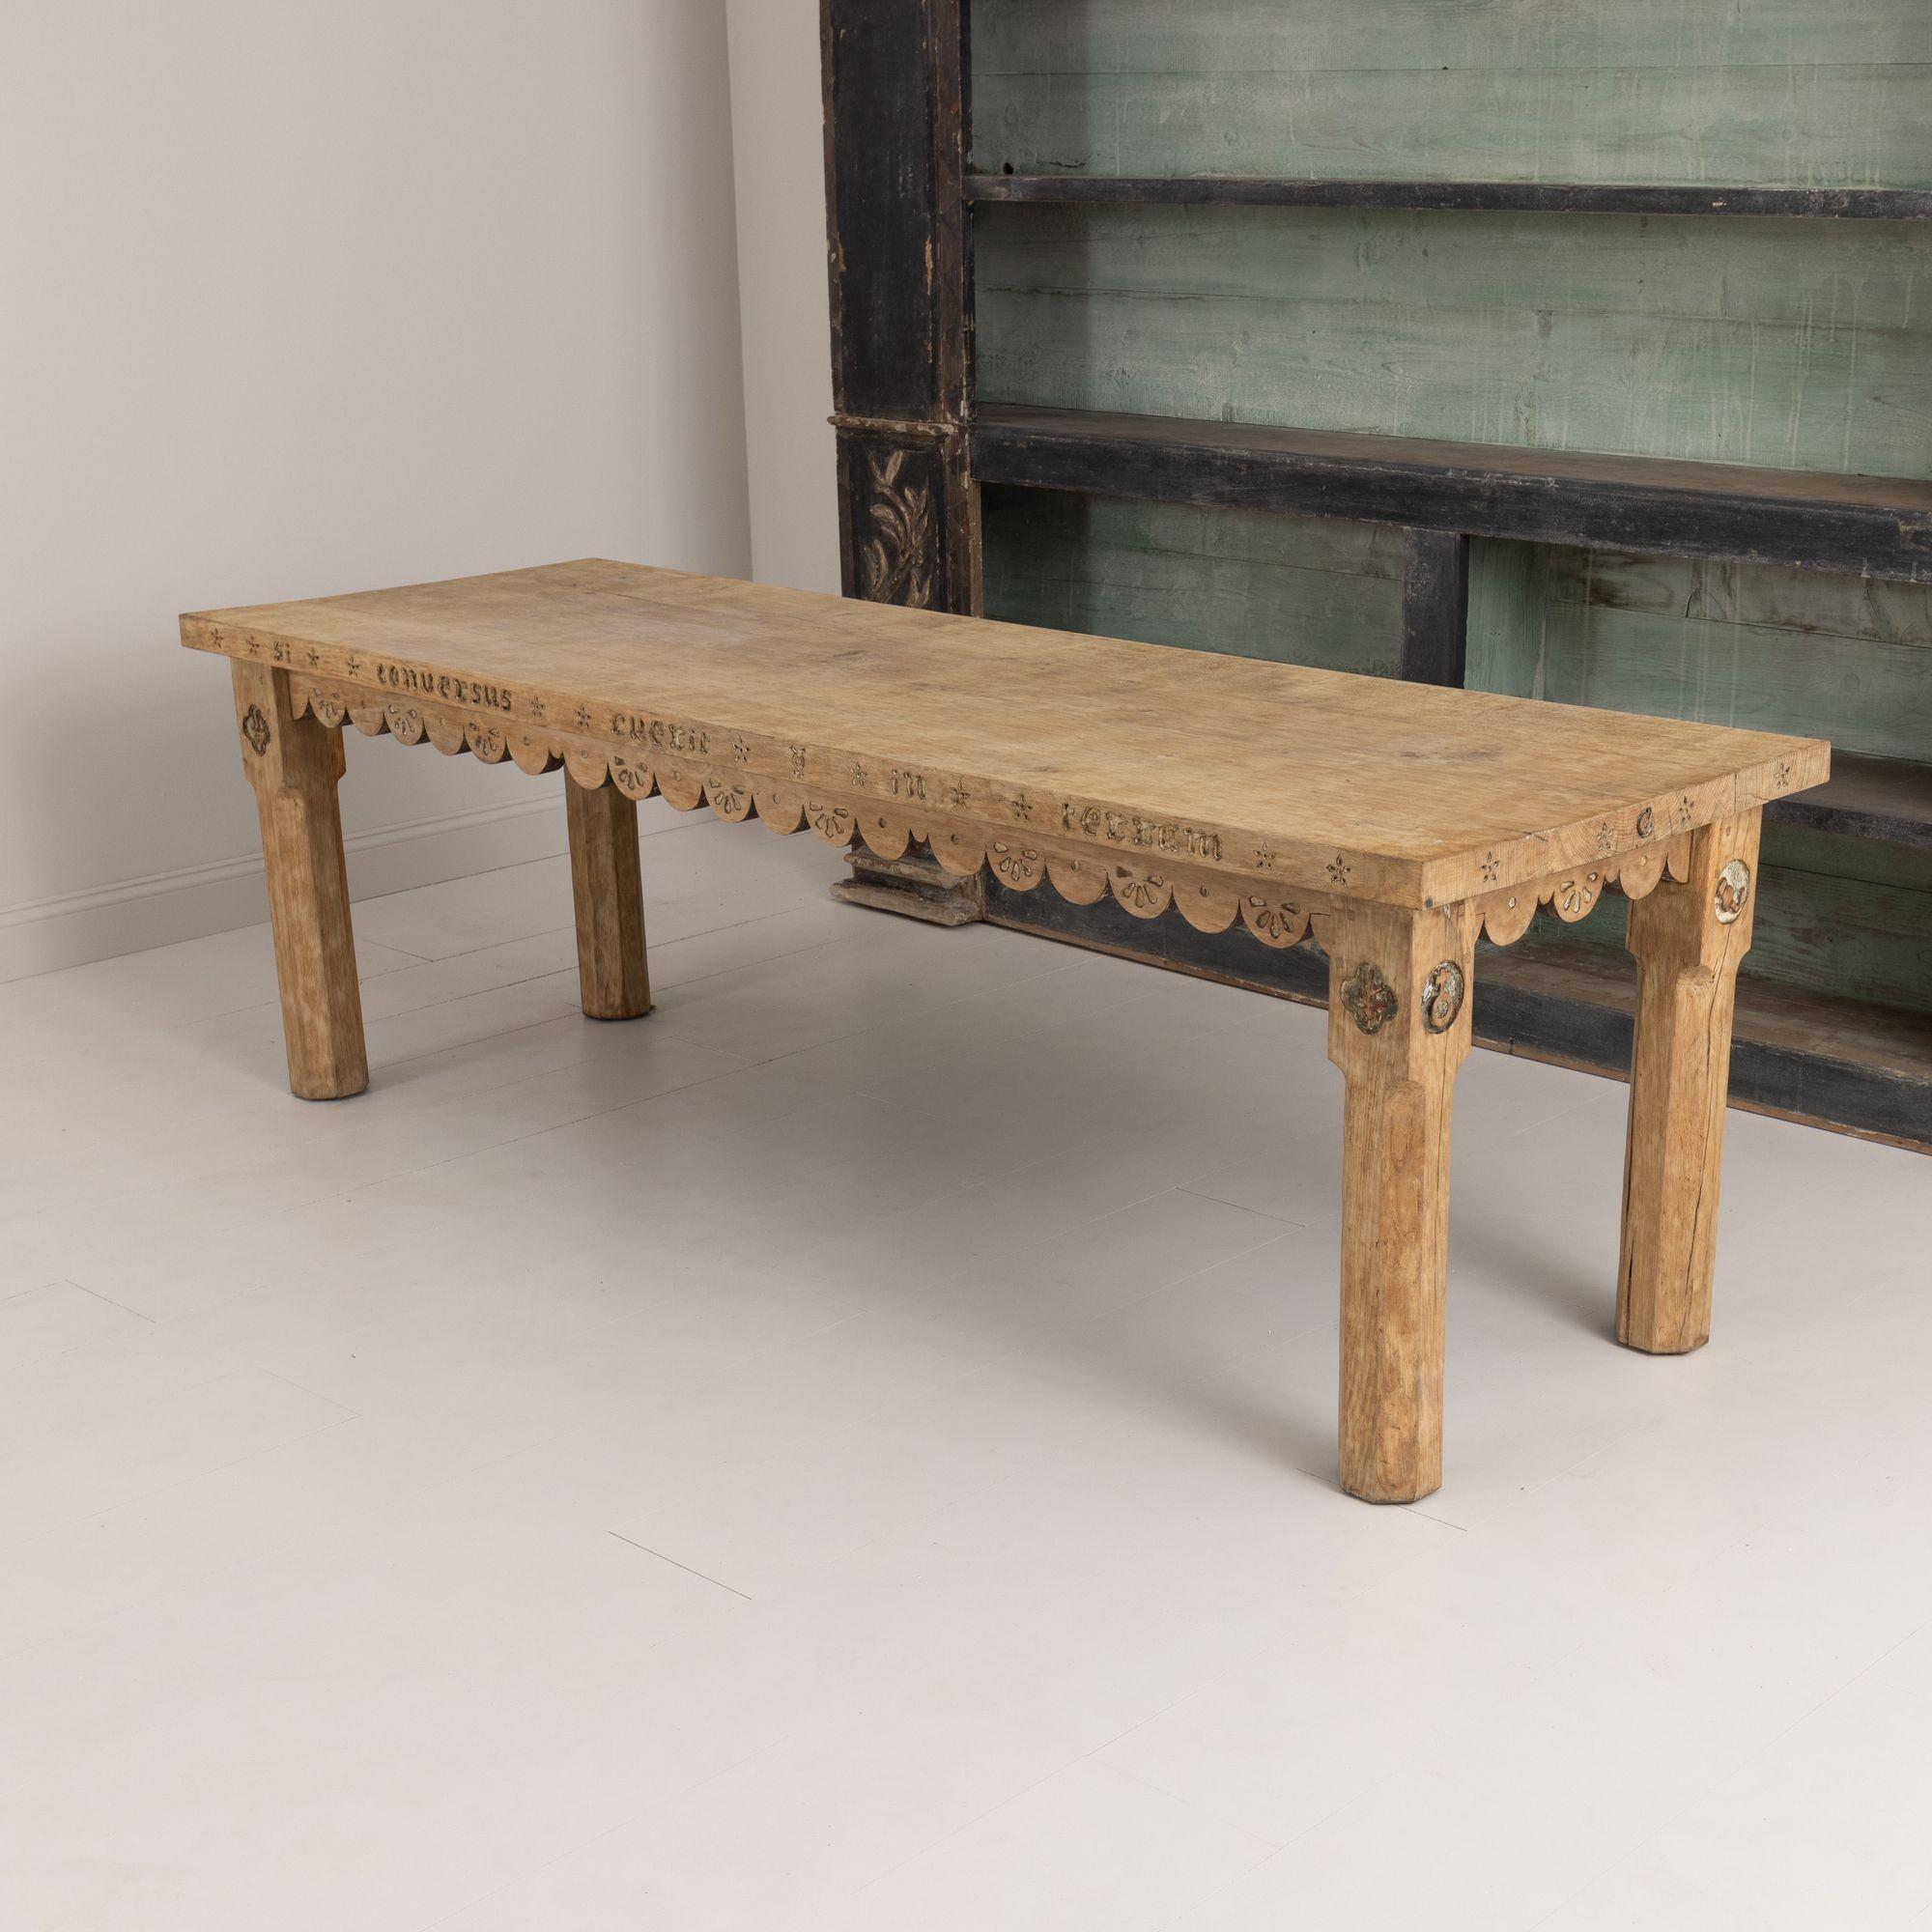 A very charming and distinct French oak rectangular table from the 19th century. The beautiful, aged patina is original. The apron is scalloped on all four sides and features unique Latin carvings. Sturdy chamfered square legs with carved symbols on